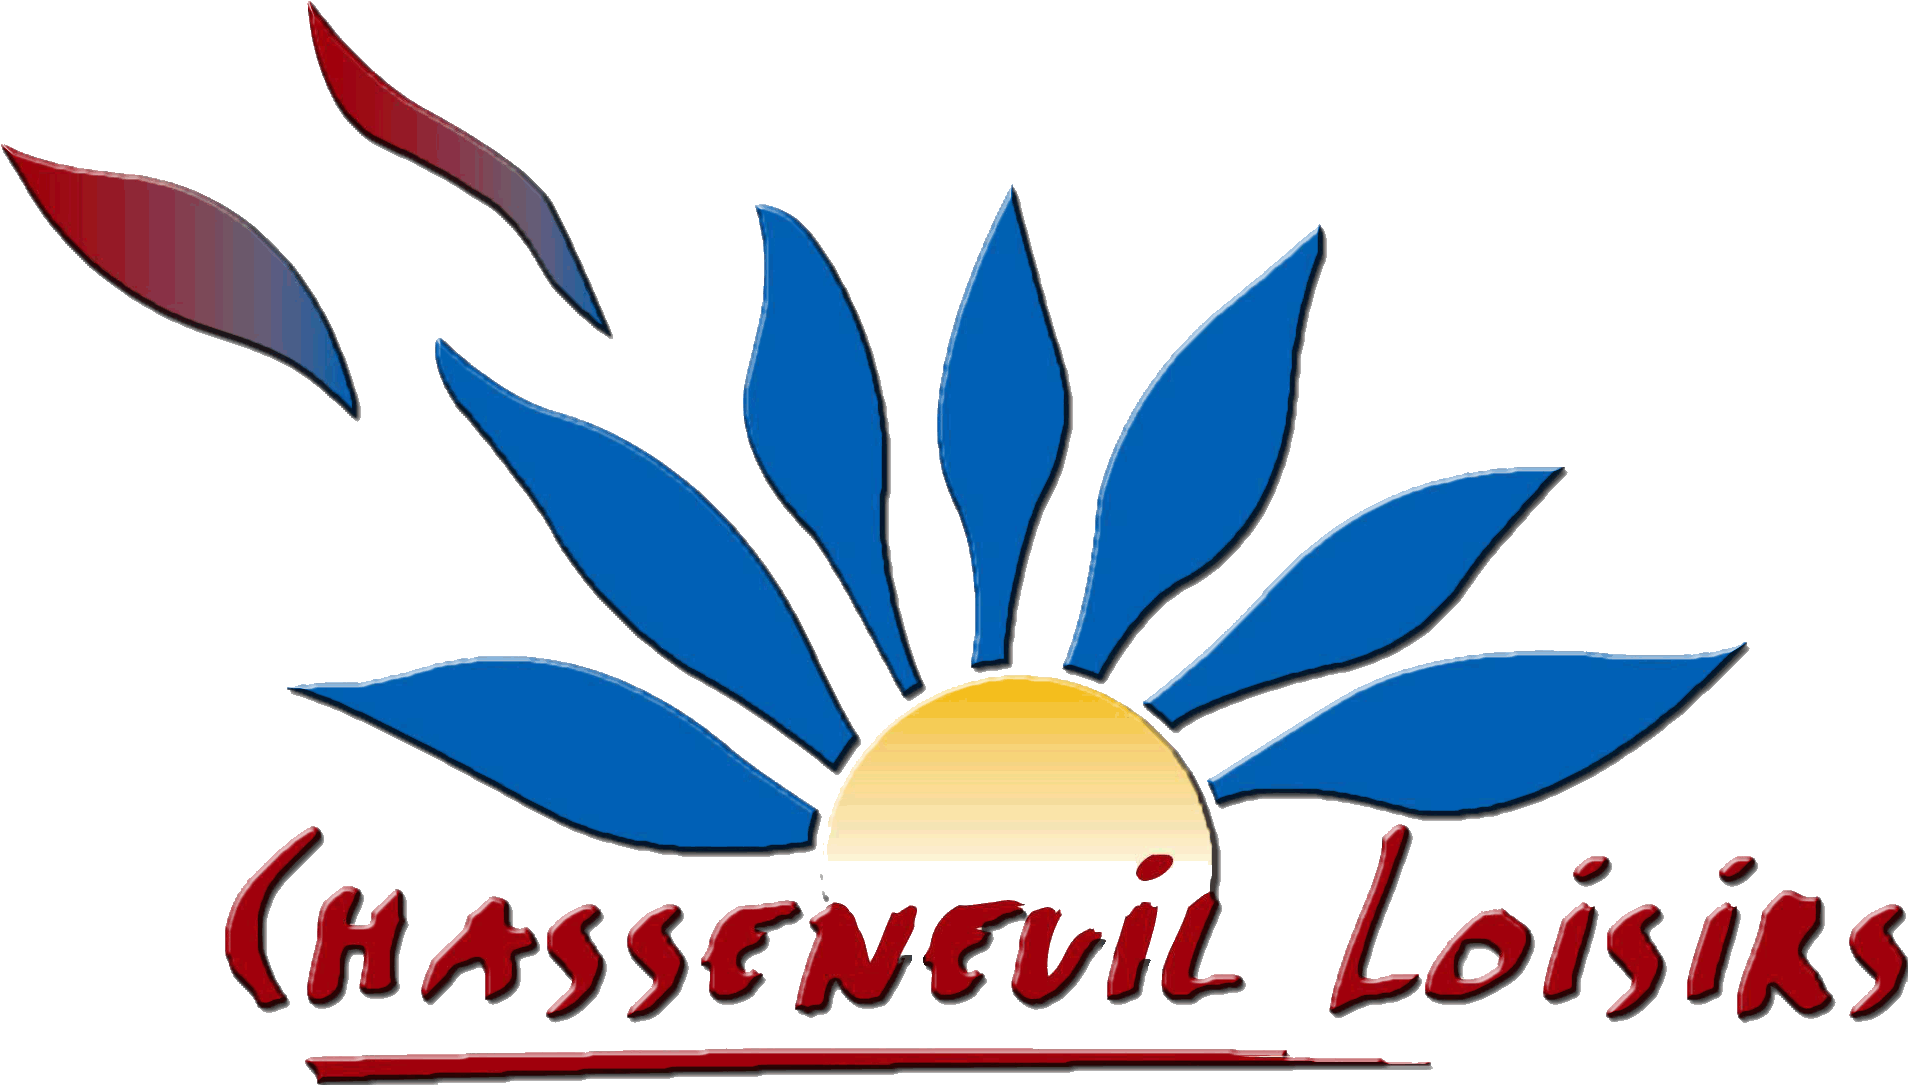 Chasseneuil Loisirs